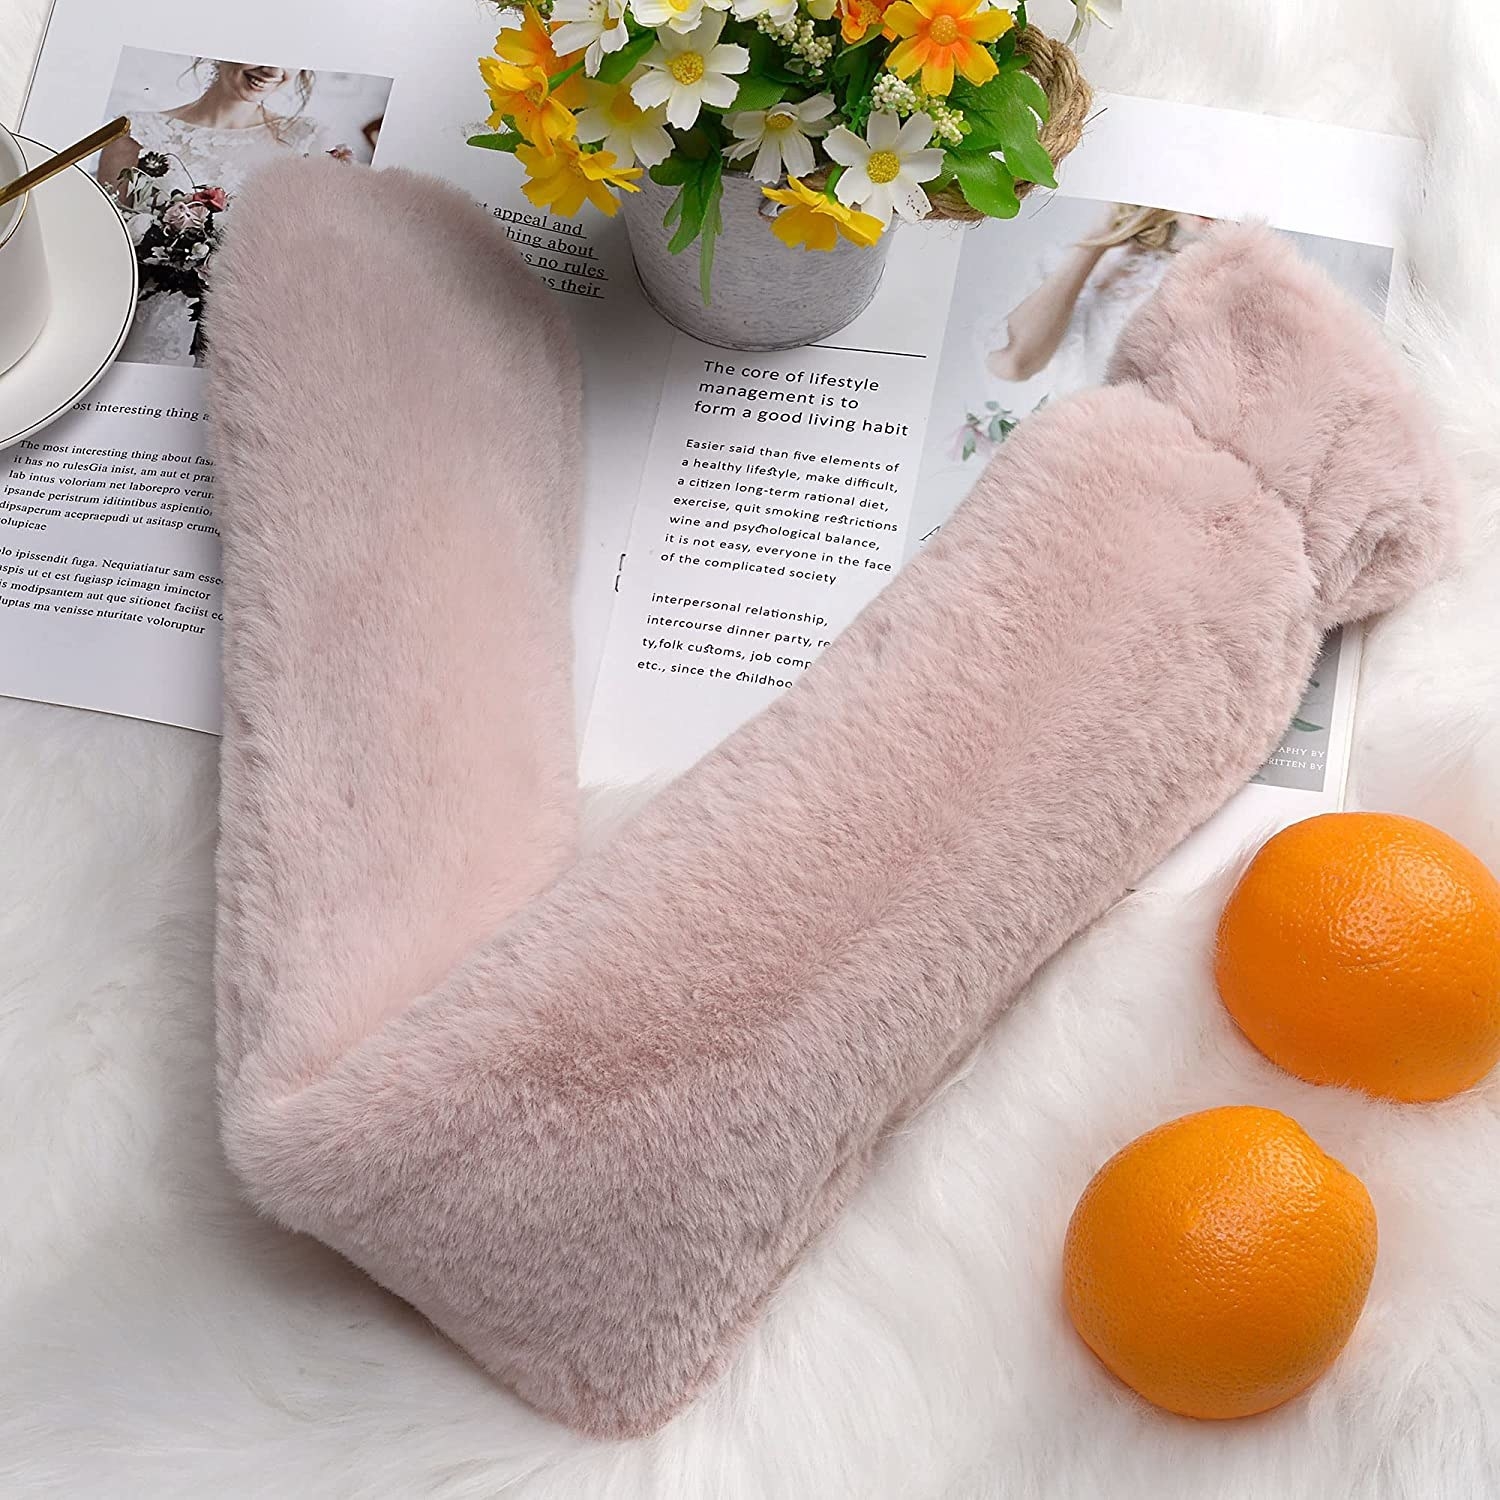 The hot water bottle on a fluffy rug surrounded by a plant and oranges